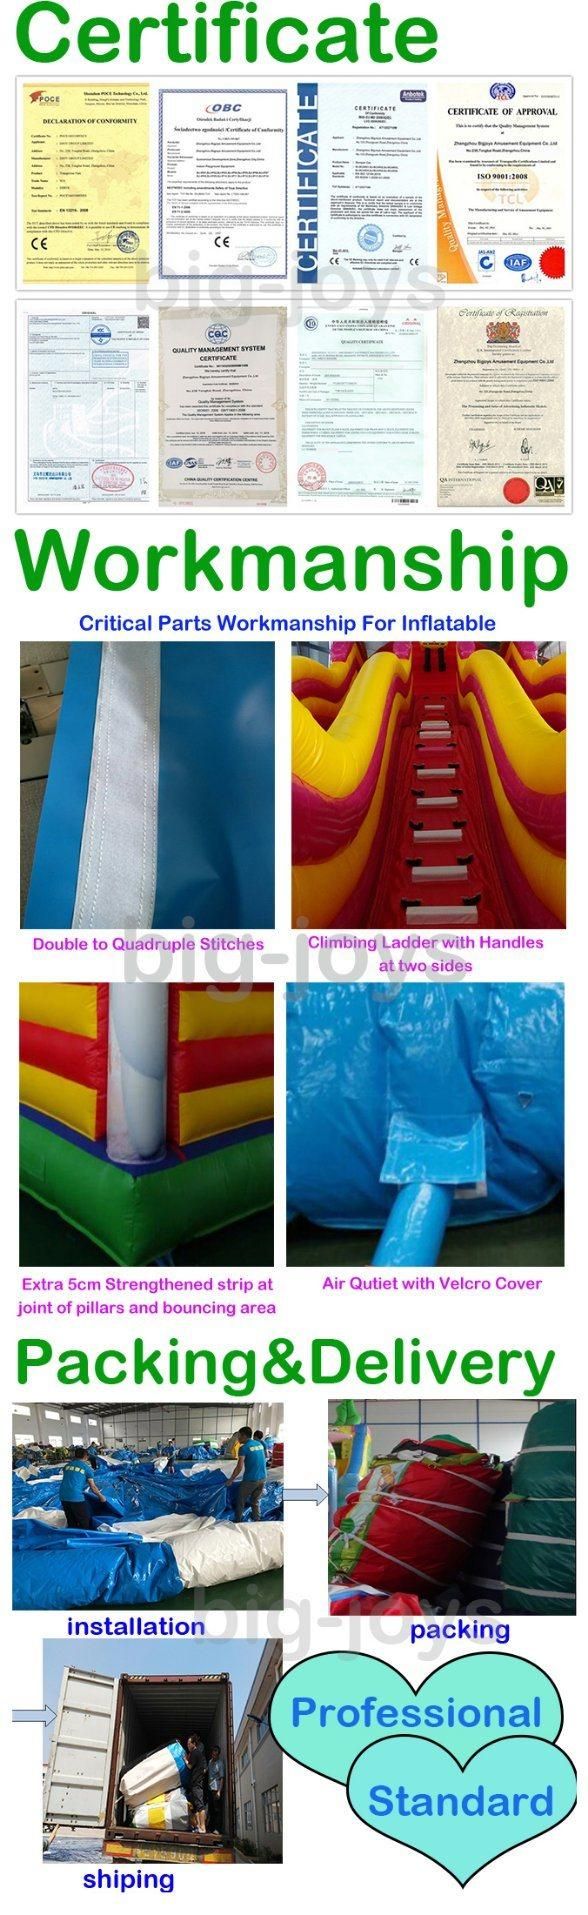 High Quality Customized Inflatable Water Slide or Dry Slide with Swimming Pool for Sale